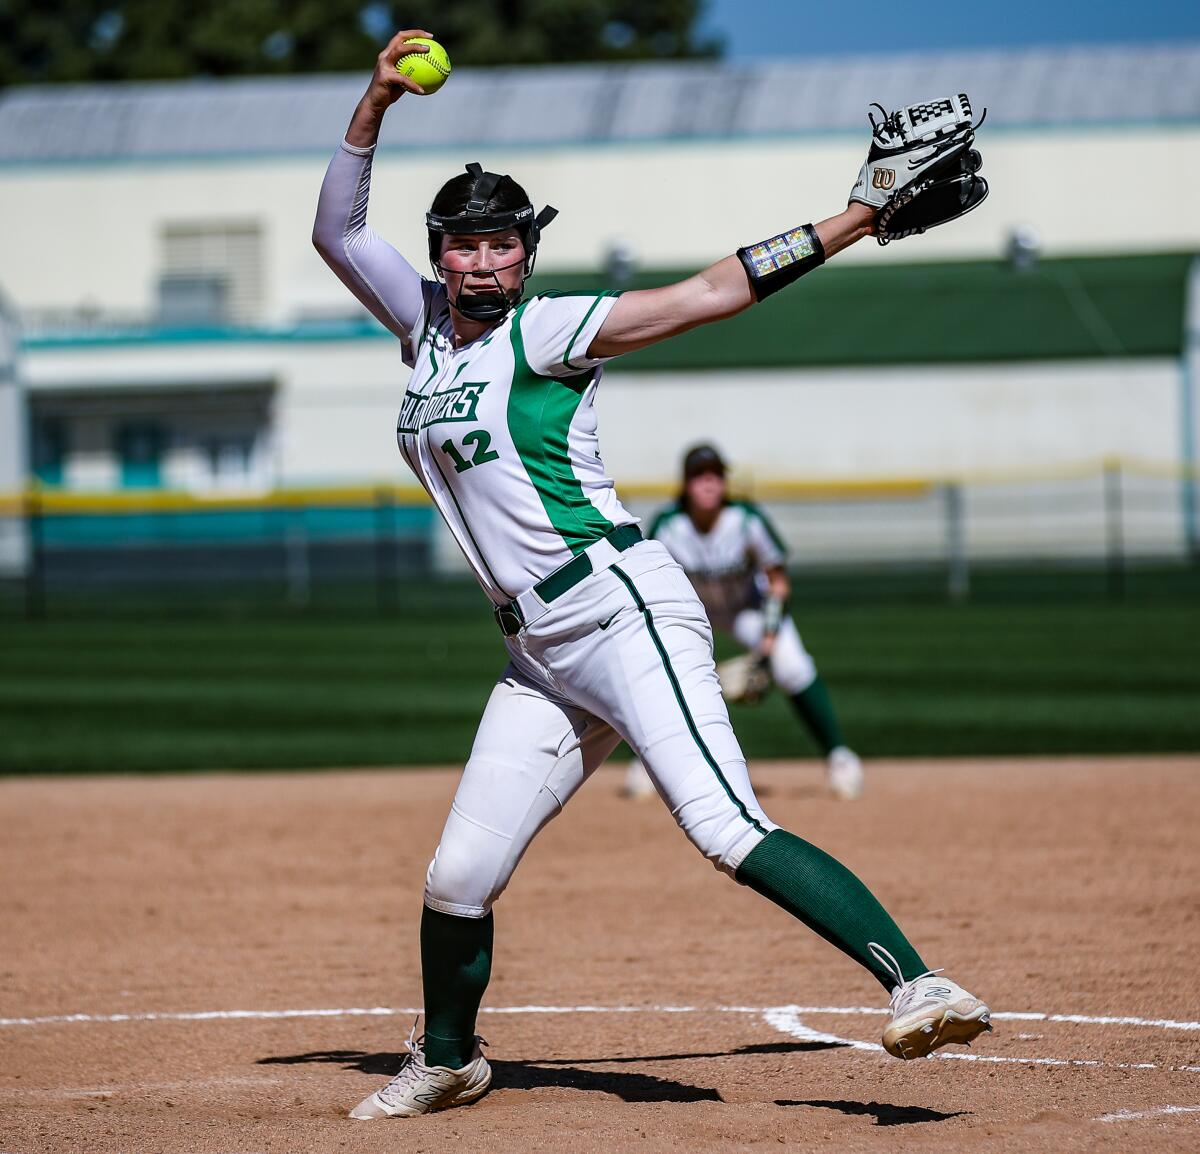 Right-hander Addison Moorman wearing a Granada Hills uniform and face guard as she winds up in the pitching circle